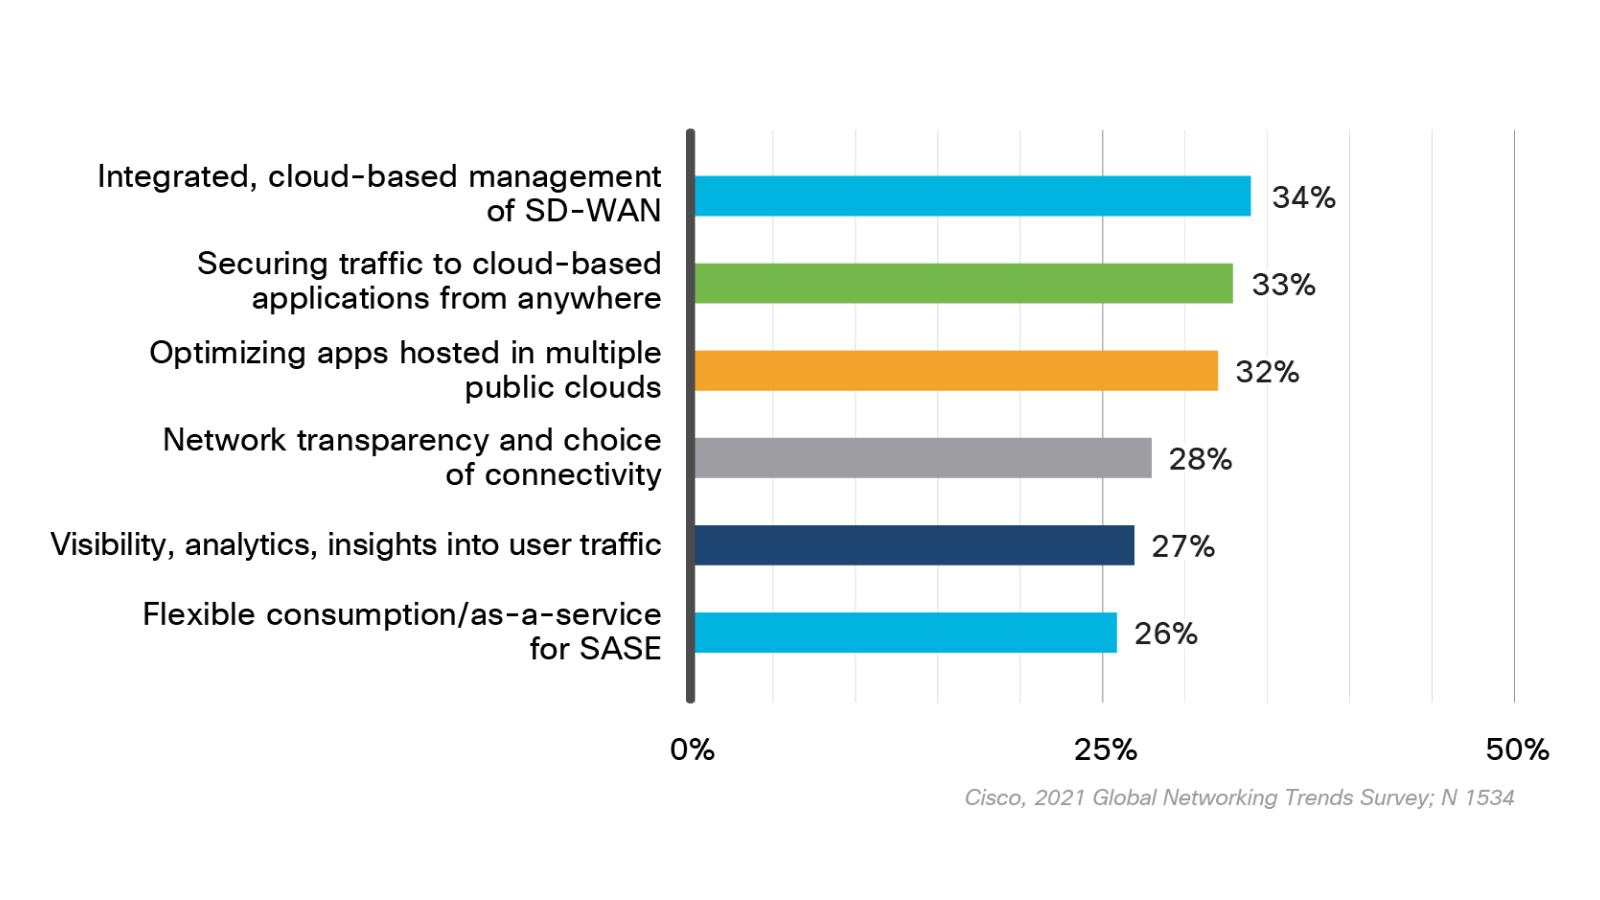 Graph showing the SASE capabilities that are a priority for organizations. 34% said integrated, cloud-based management of SD-WAN, 33% said securing traffic to cloud-based applications from anywhere, 32% said optimizing apps hosted in multiple public clouds, 28% said network transparency and choice  of connectivity, 27% said visibility, analytics, insights into user traffic, 26% said flexible consumption/as-a-service for SASE.